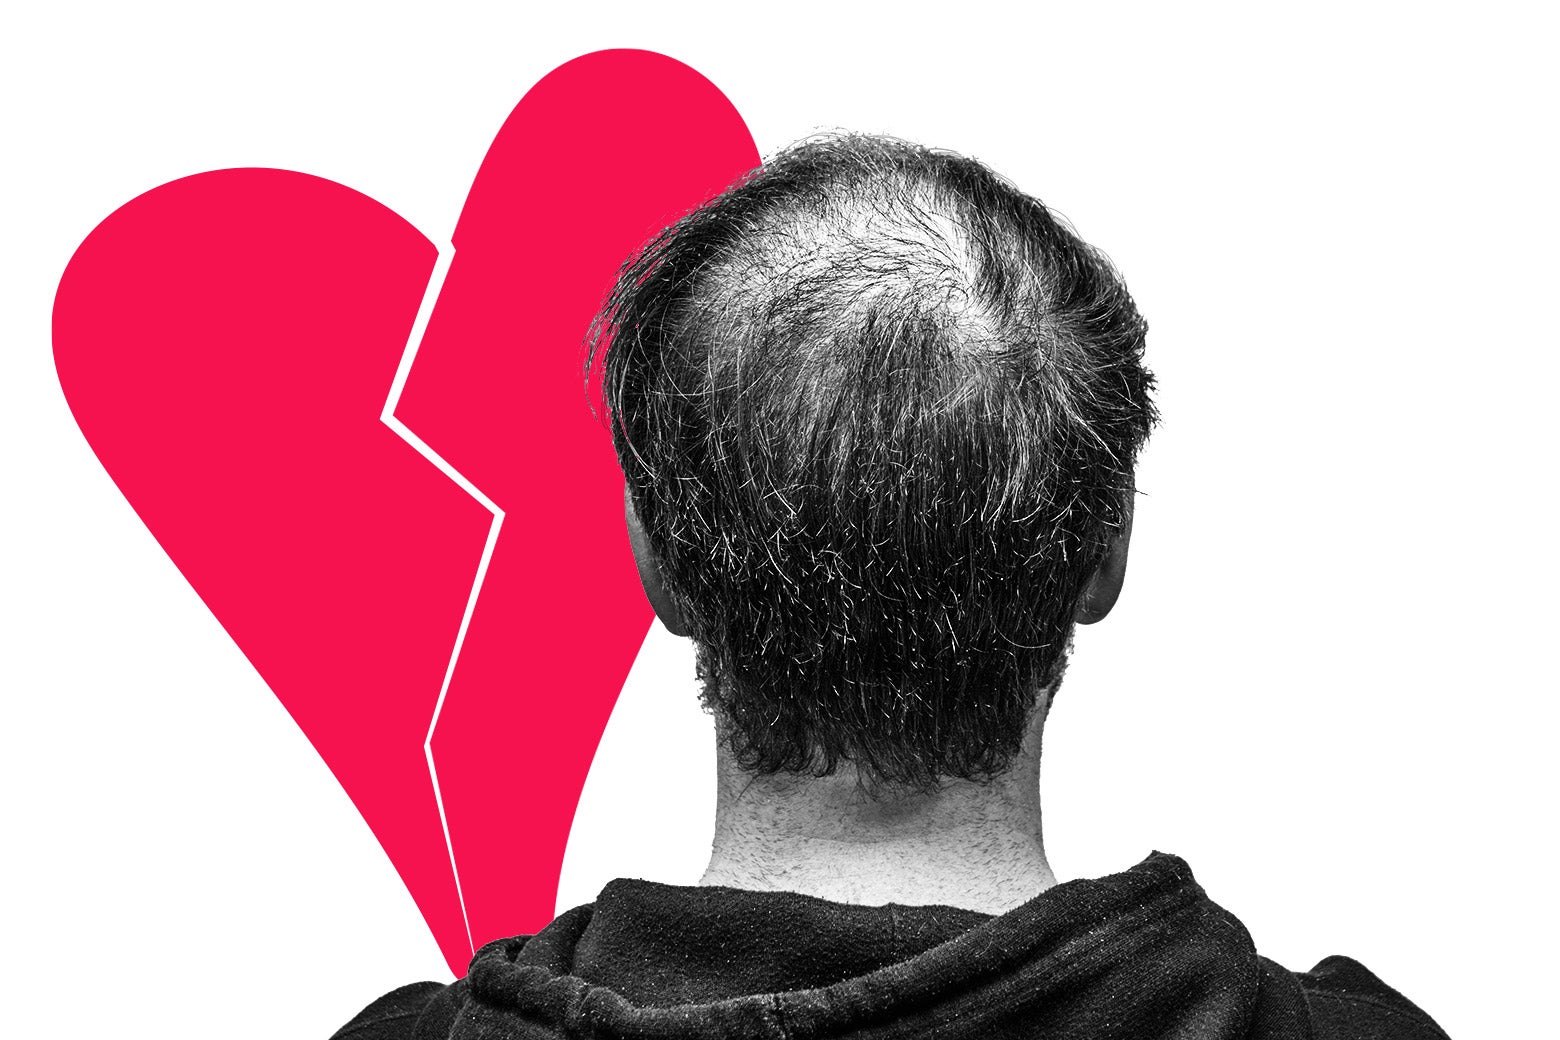 The back of a man's head who is experiencing balding. An illustrated broken heart is overlaid behind him.